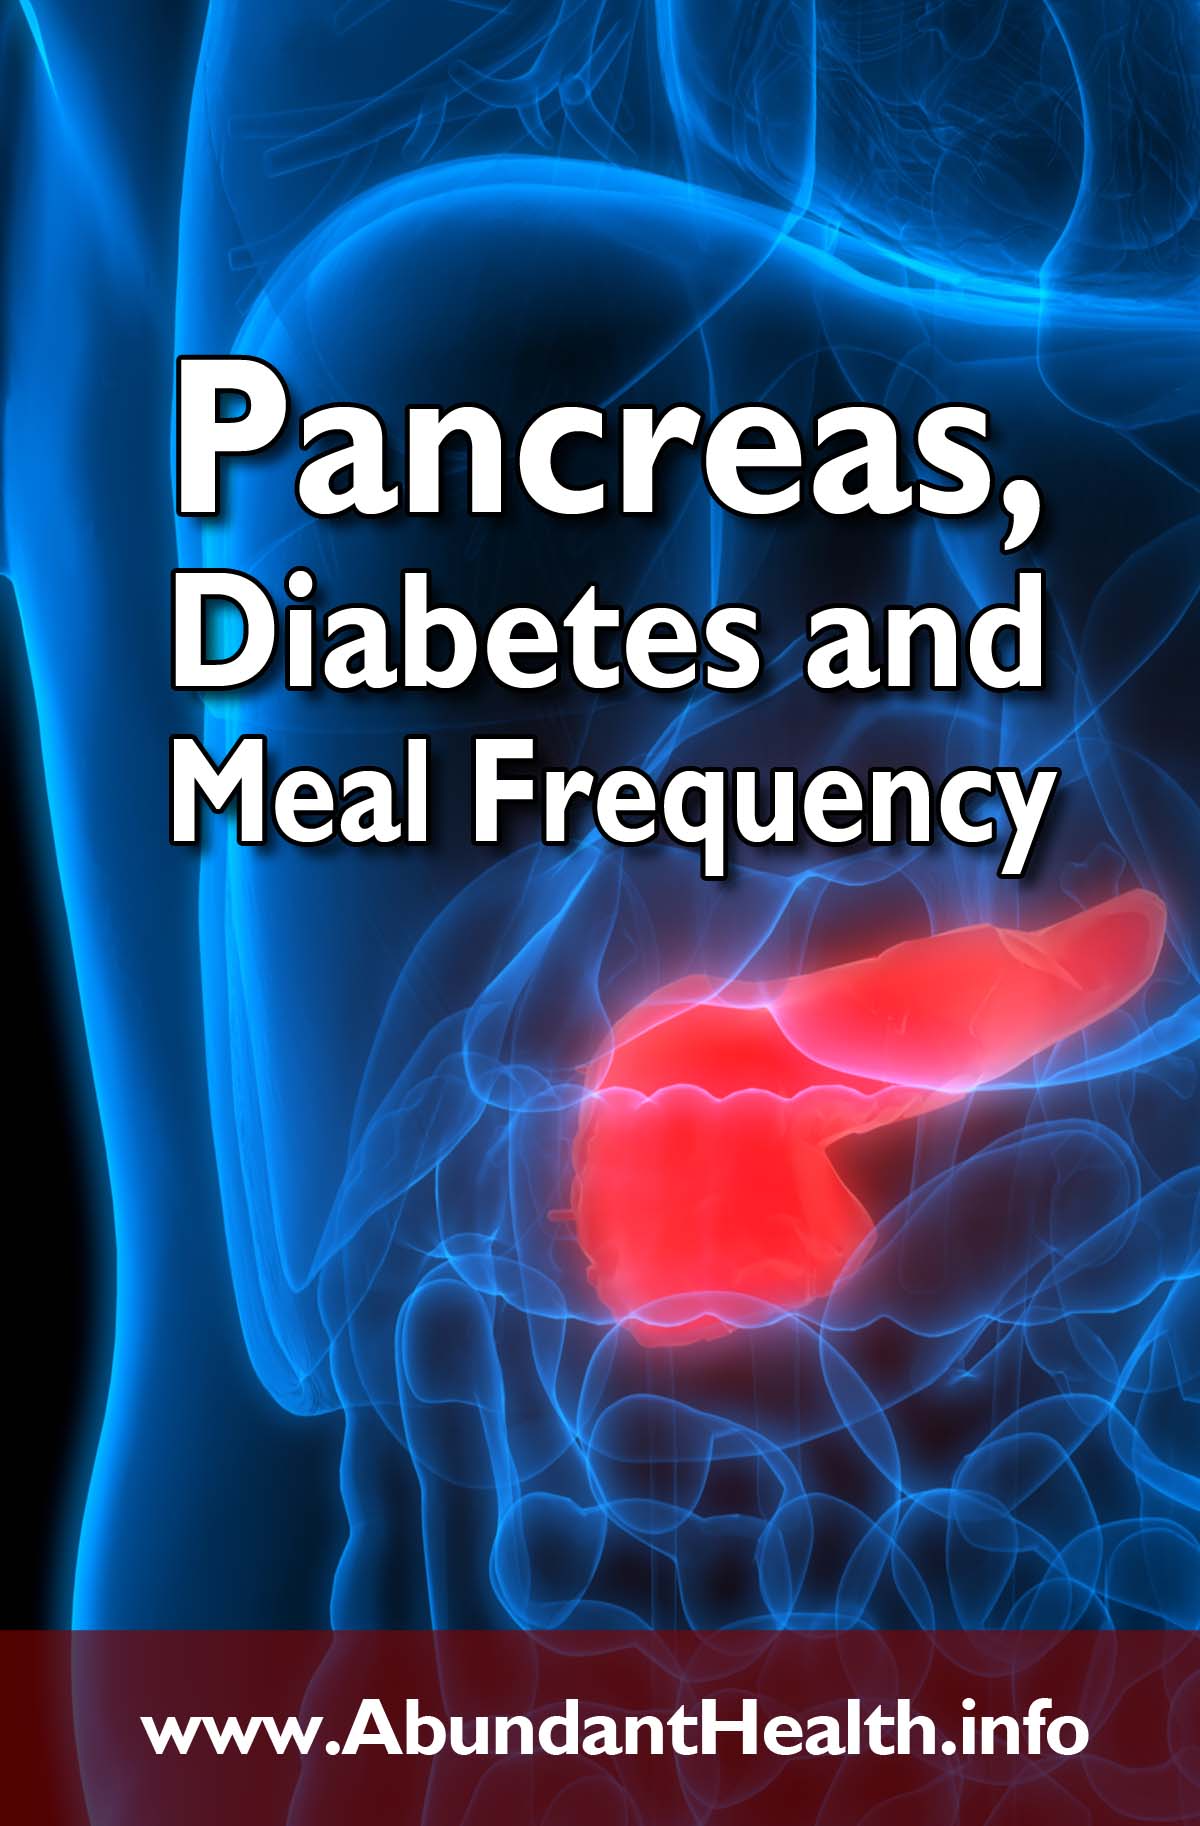 Pancreas, Diabetes and Meal Frequency